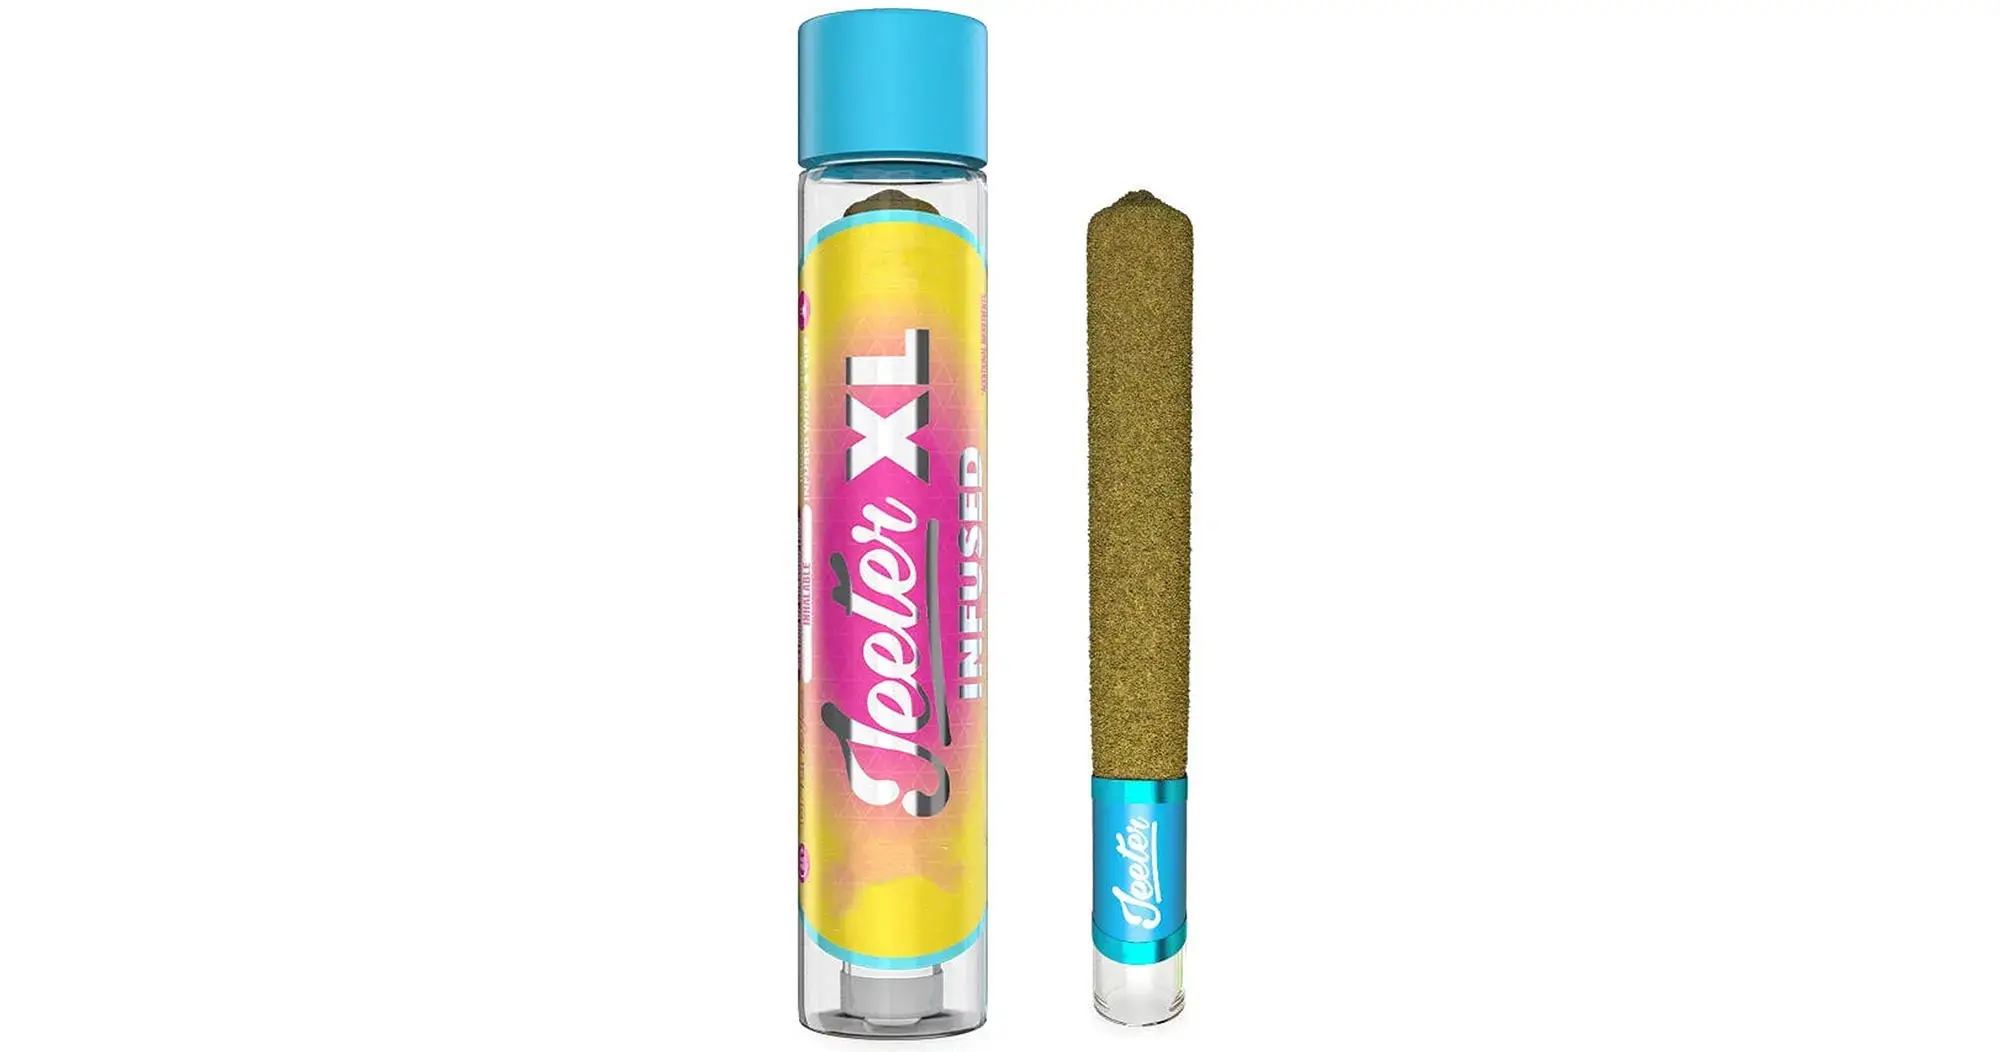 Berry White XL Infused Pre-Roll